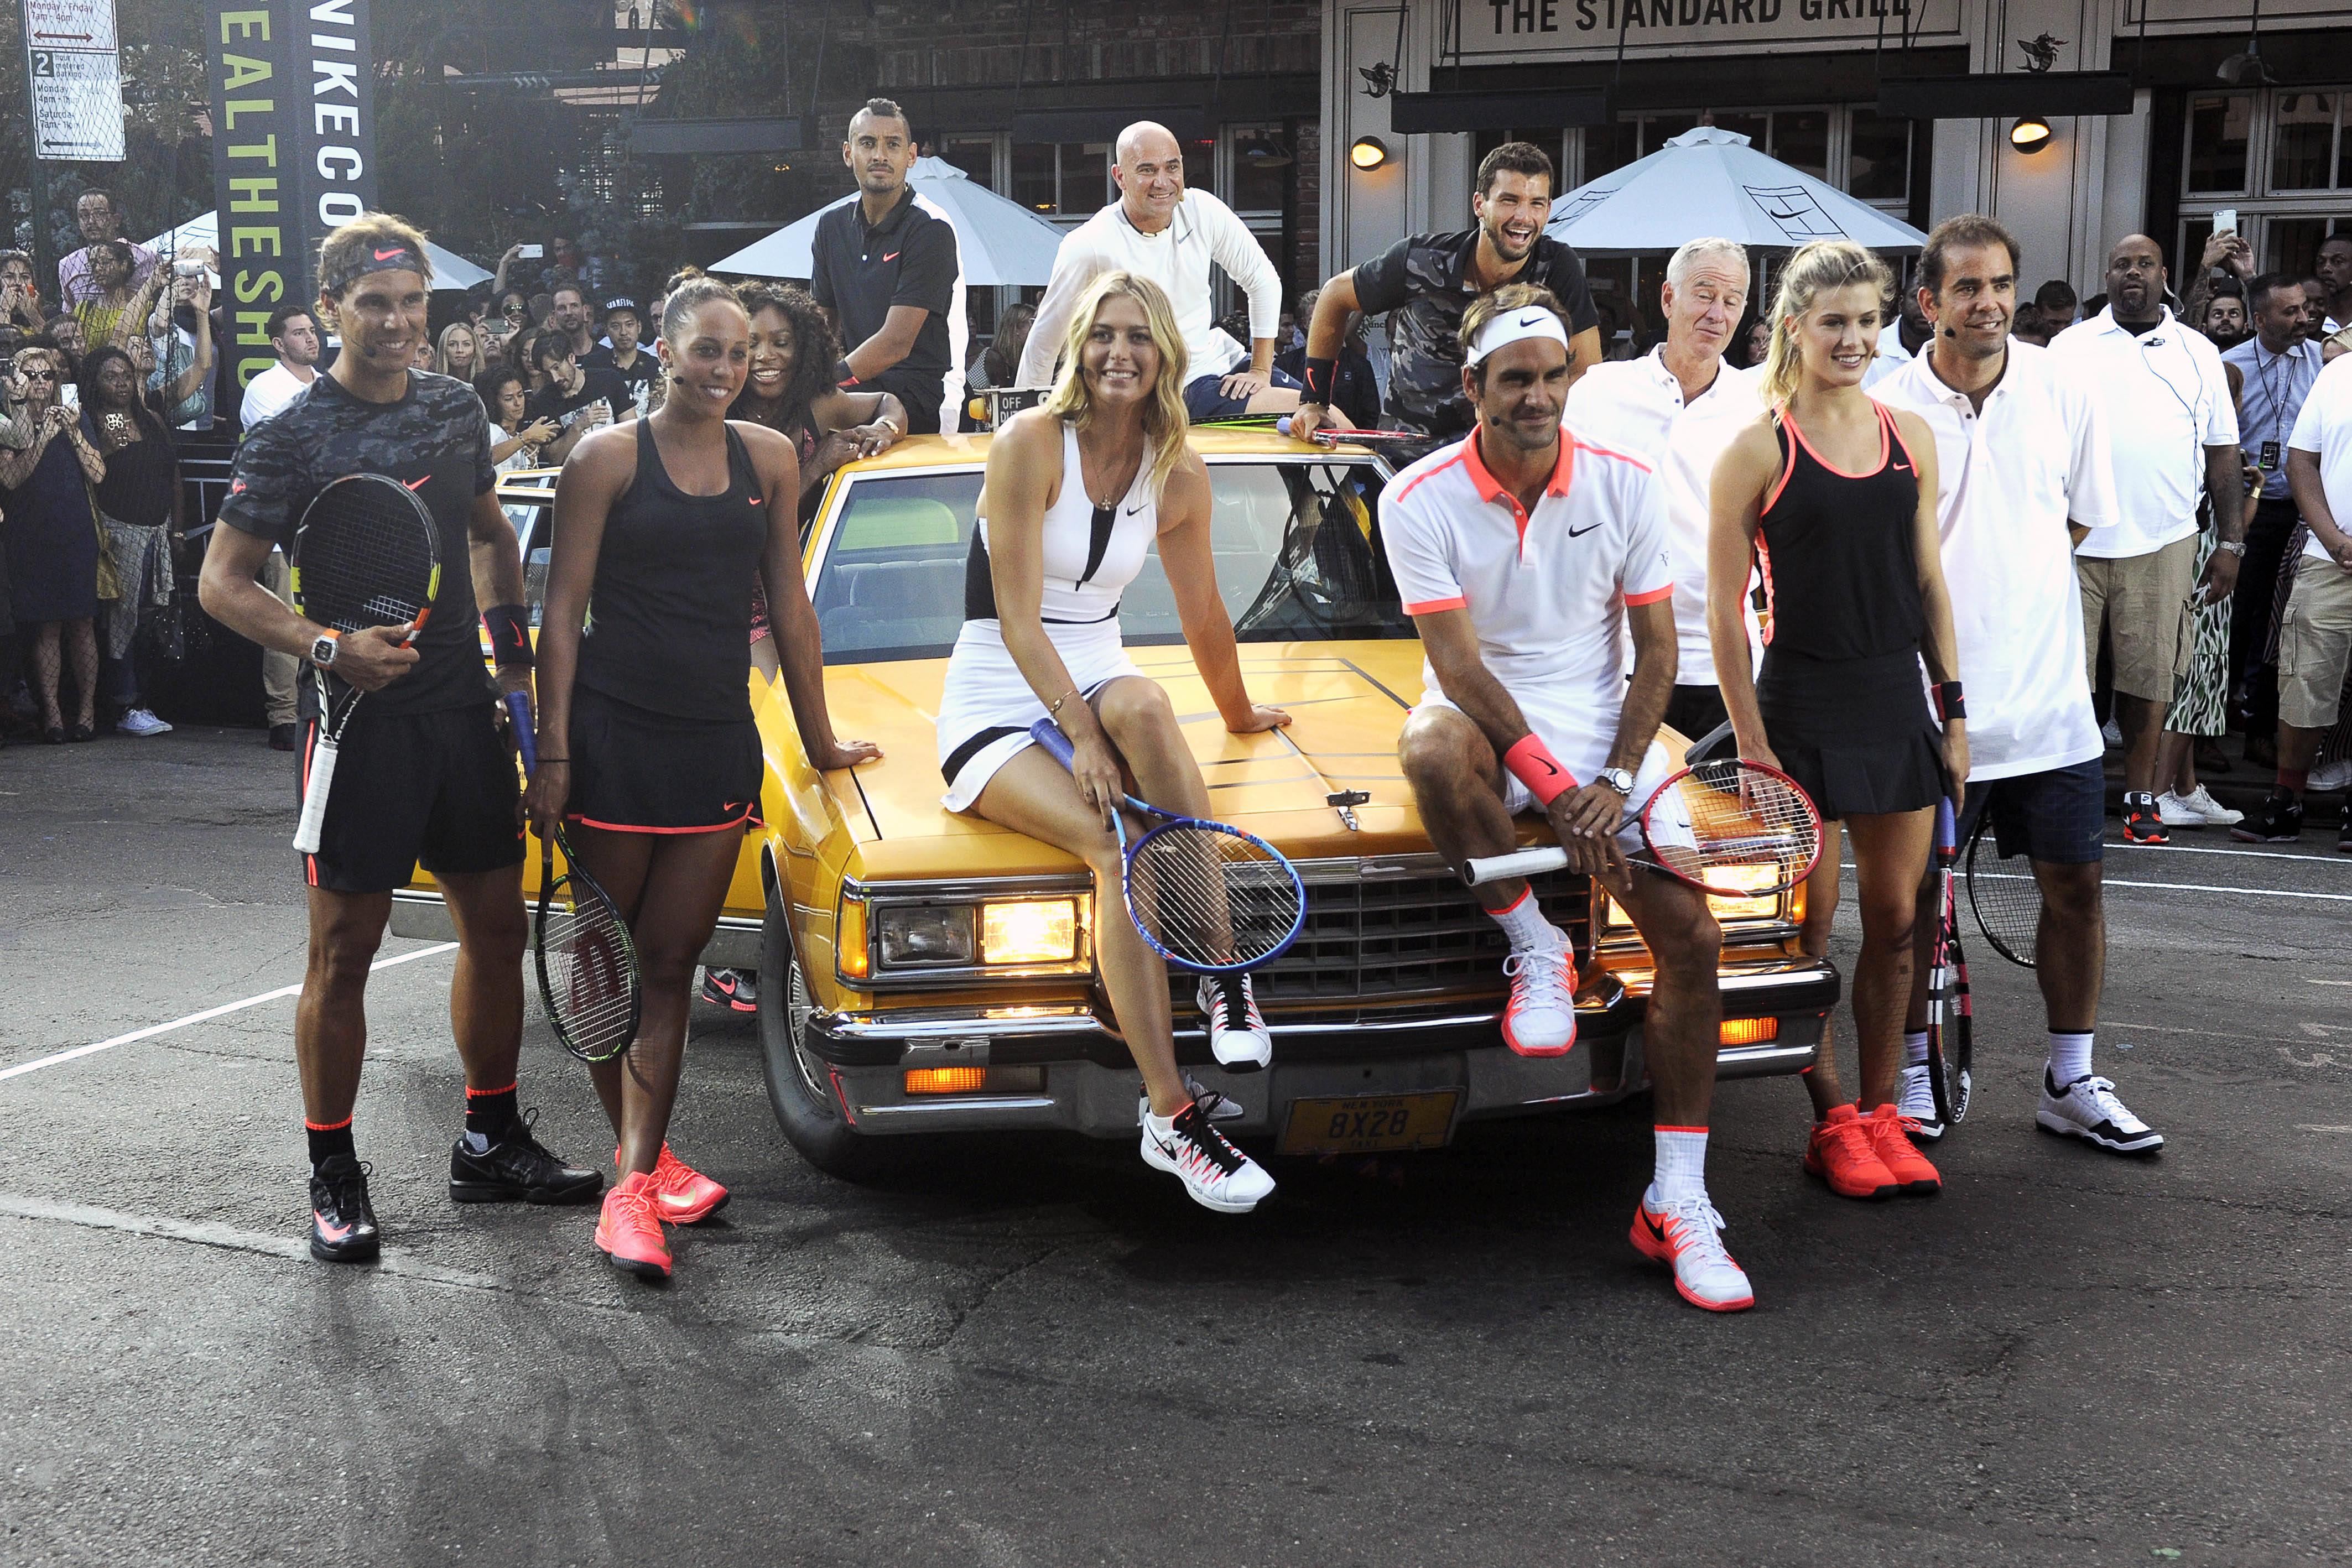 Nike's 'NYC Street Tennis' Event in New York